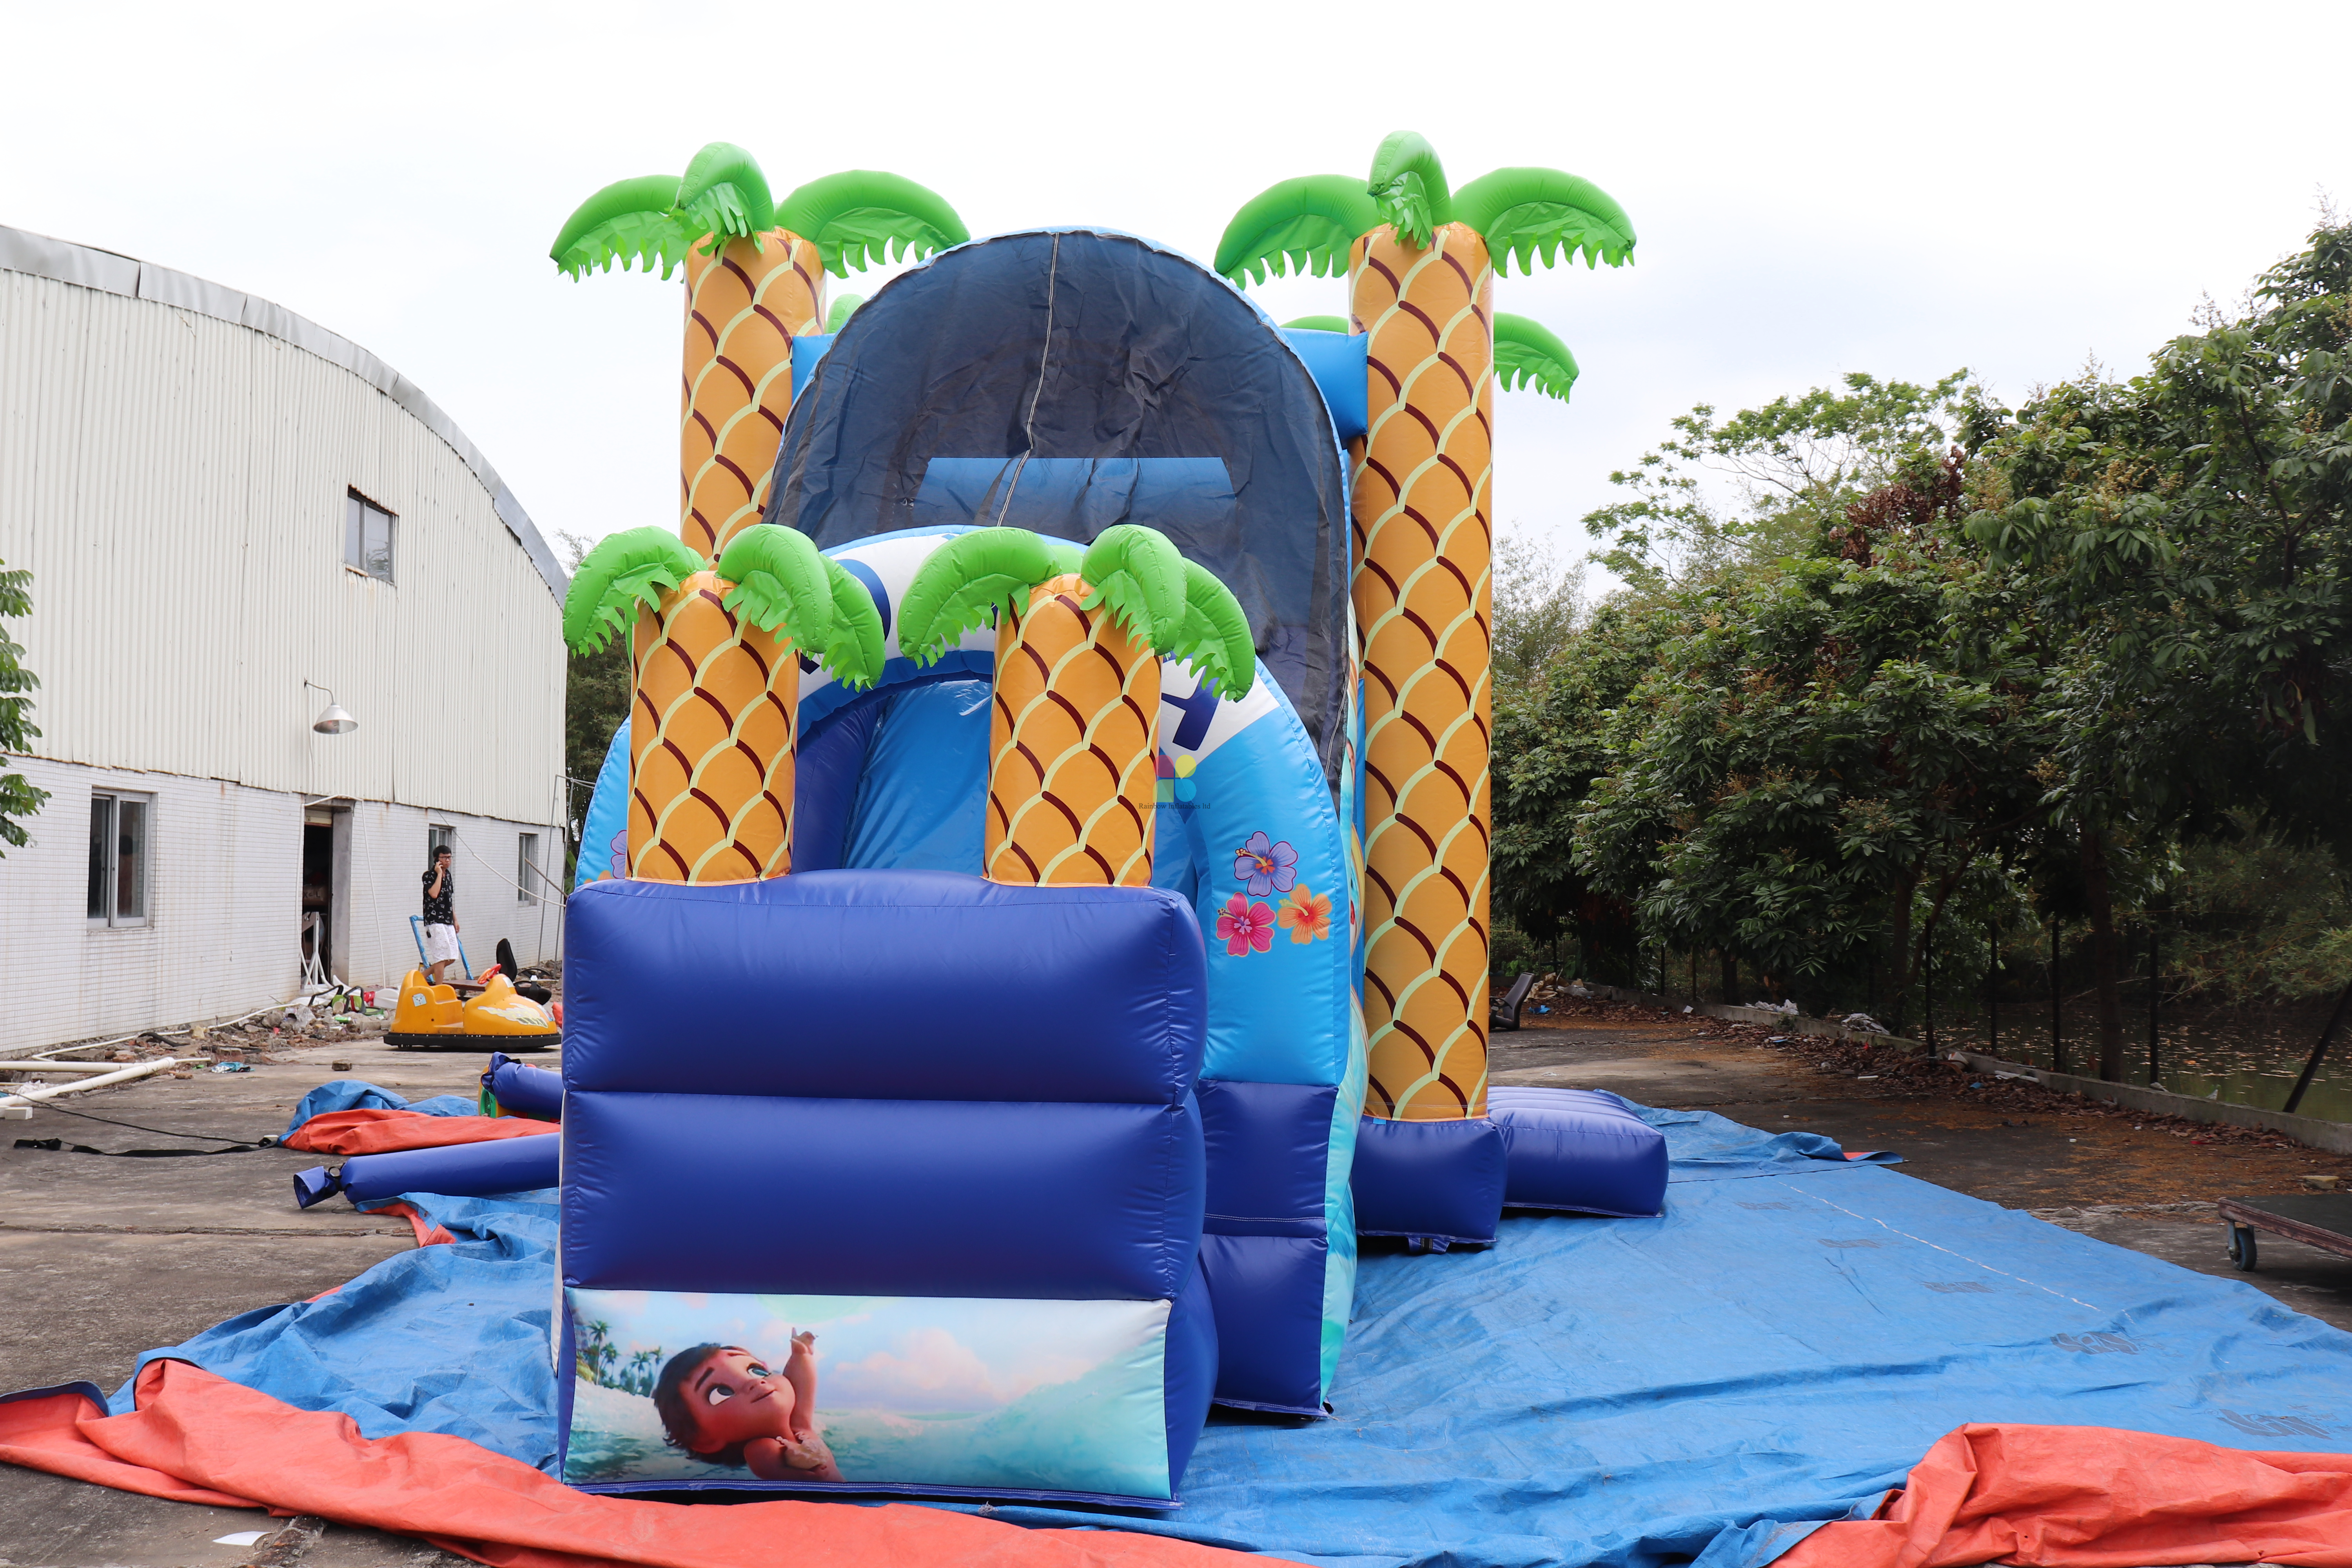 Outdoor Commercial Durable Inflatable Moana Combo for Sale